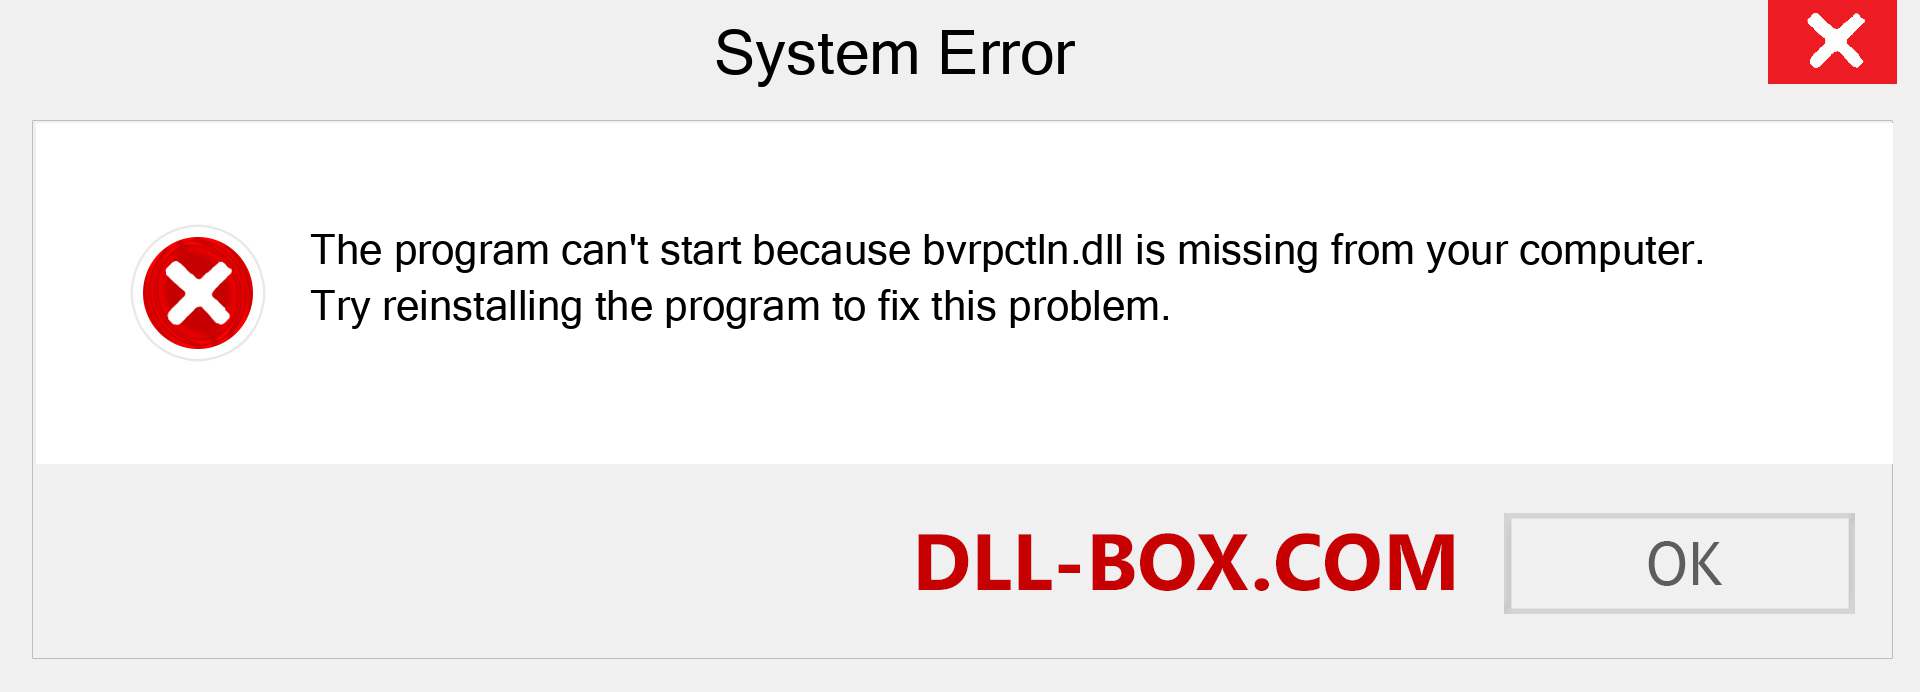  bvrpctln.dll file is missing?. Download for Windows 7, 8, 10 - Fix  bvrpctln dll Missing Error on Windows, photos, images